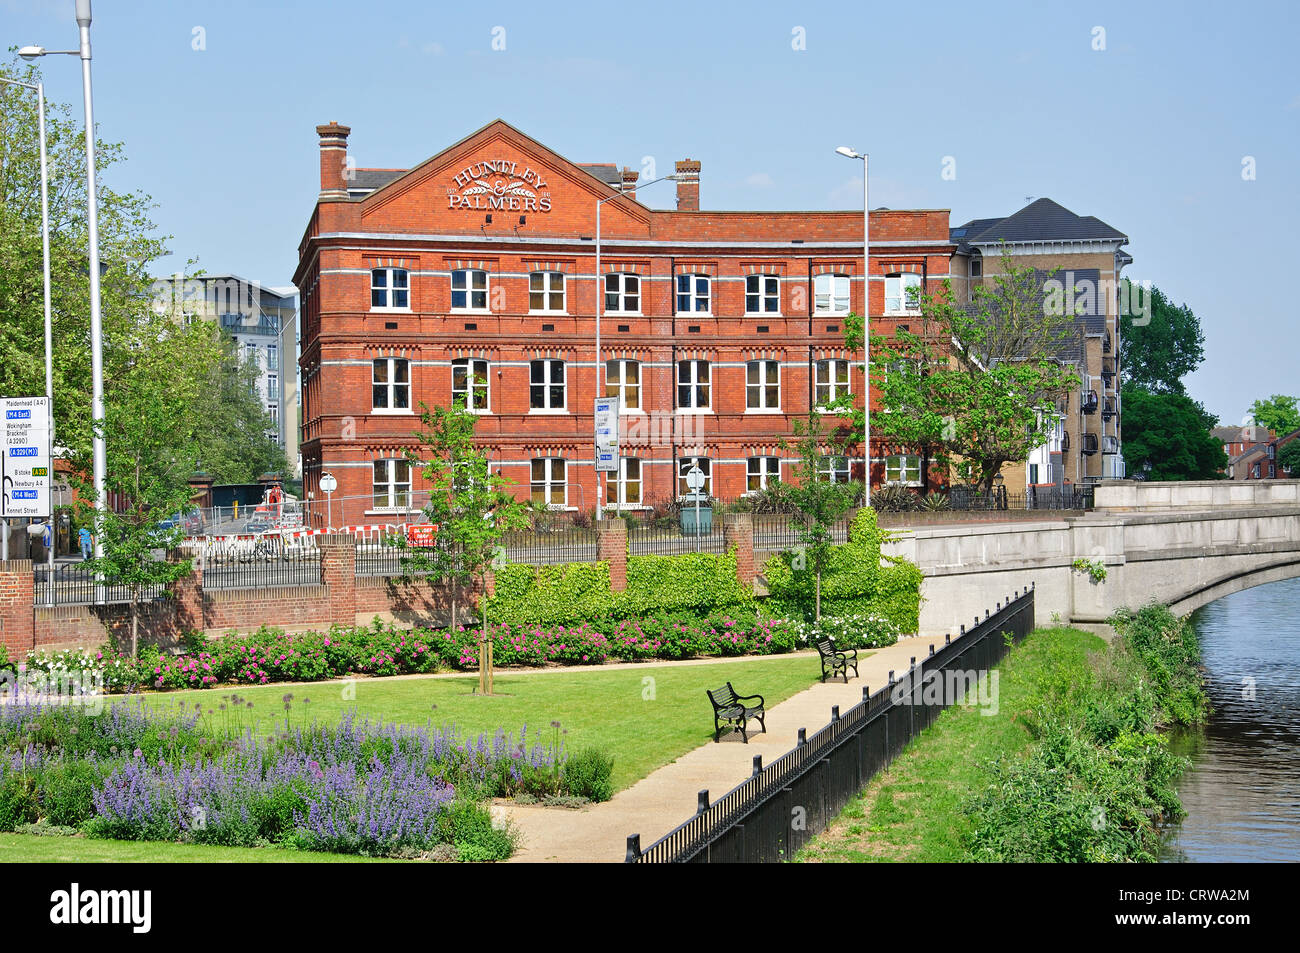 Huntley & Palmers disused factory building, Gas Works Road, Reading, Berkshire, England, United Kingdom Stock Photo